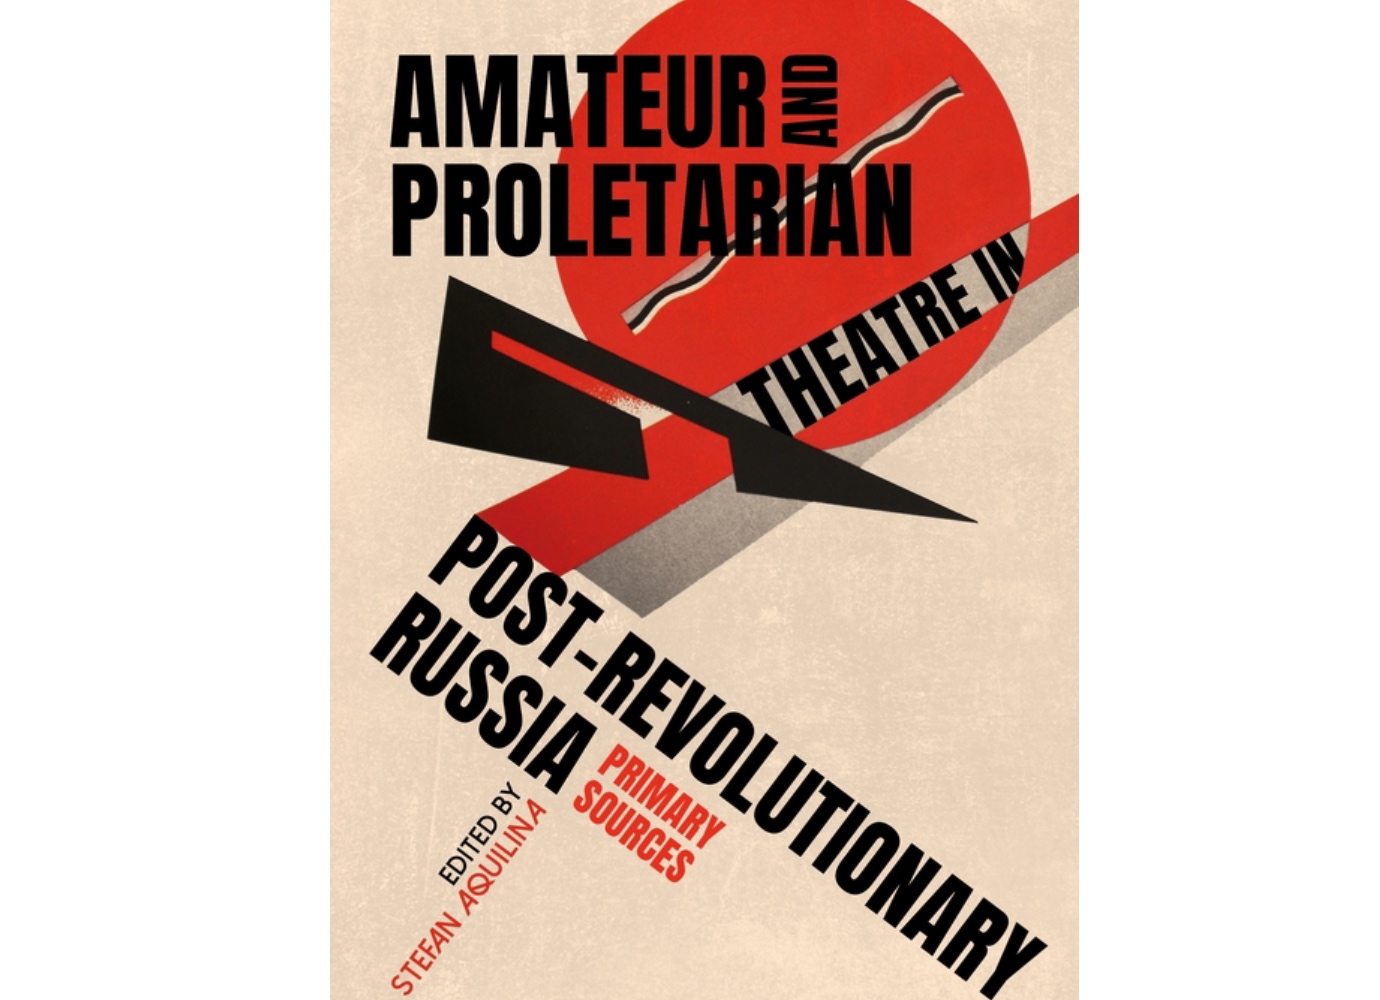 Amateur and Proletarian Theatre in Post-Revolutionary Russia | Calvert Reads